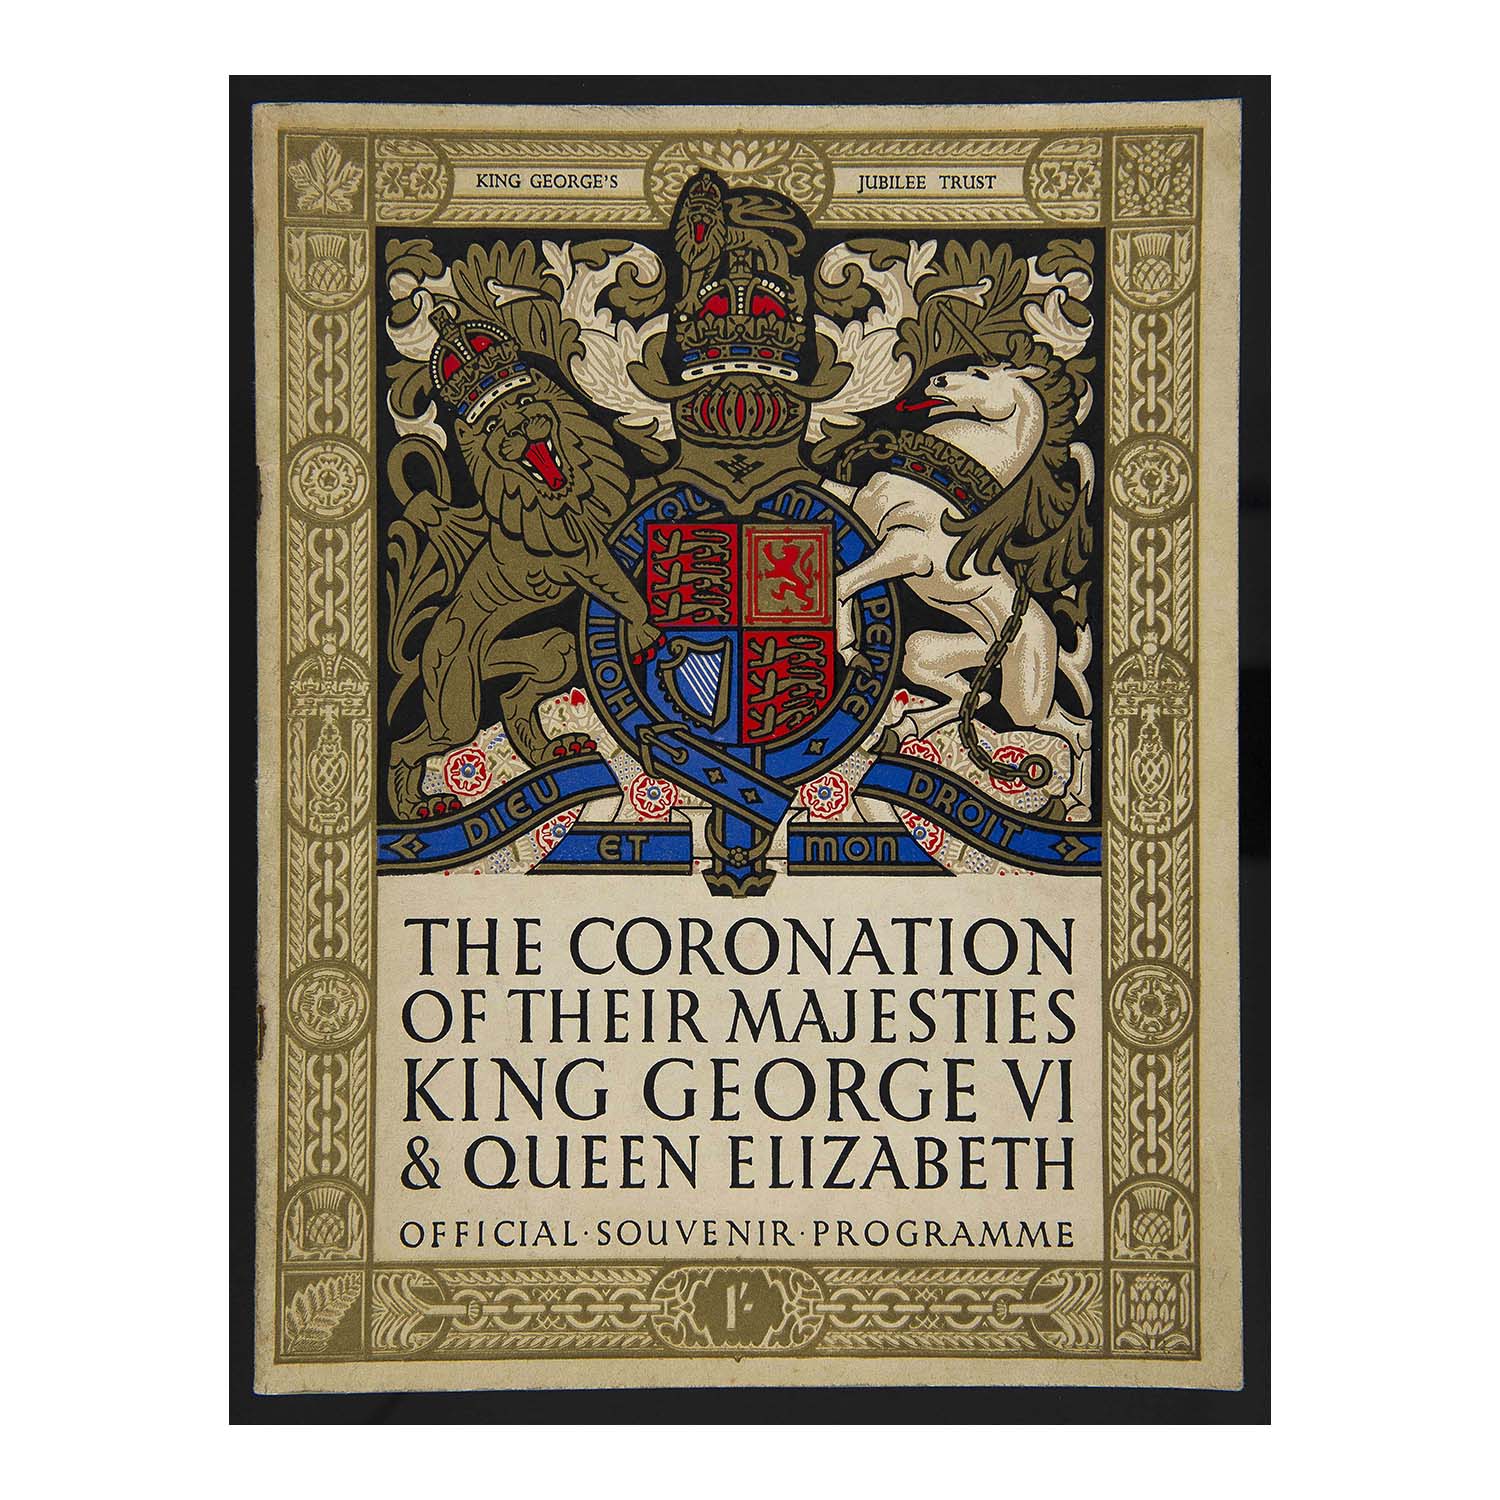 Original Official Souvenir Programme for the Coronation of Their Majesties King George VI and Queen Elizabeth, May 12th 1937